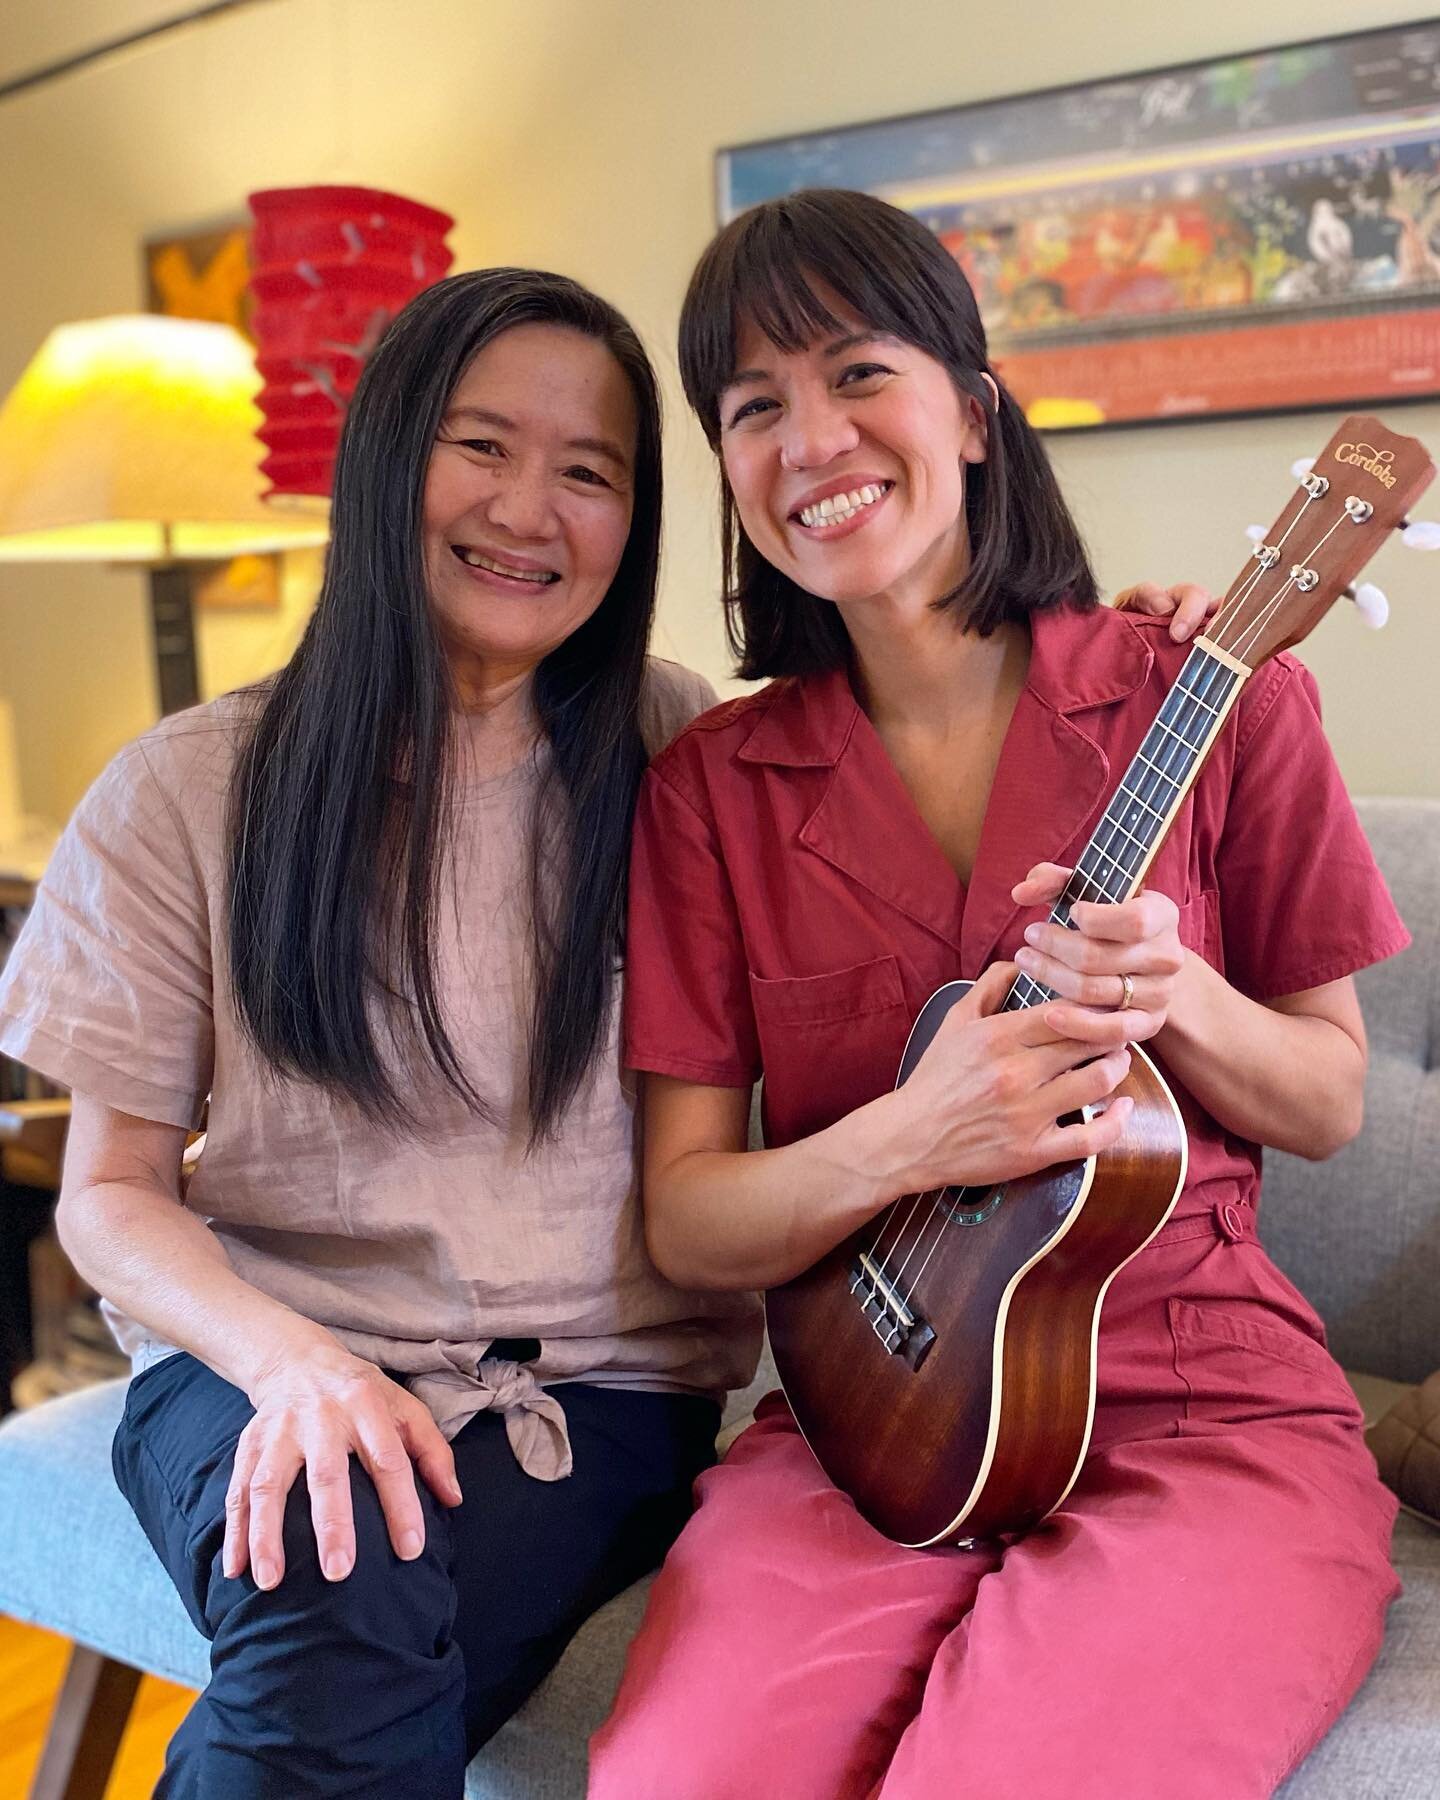 New video out tomorrow! My mom and I recorded our song &ldquo;Happy Moon Festival&rdquo; in anticipation of the Mid-Autumn Festival next week. There&rsquo;s lots of fun b-roll! Excited to share it with you. 🥮🏮

[ image ID: Miss Katie holds a ukulel